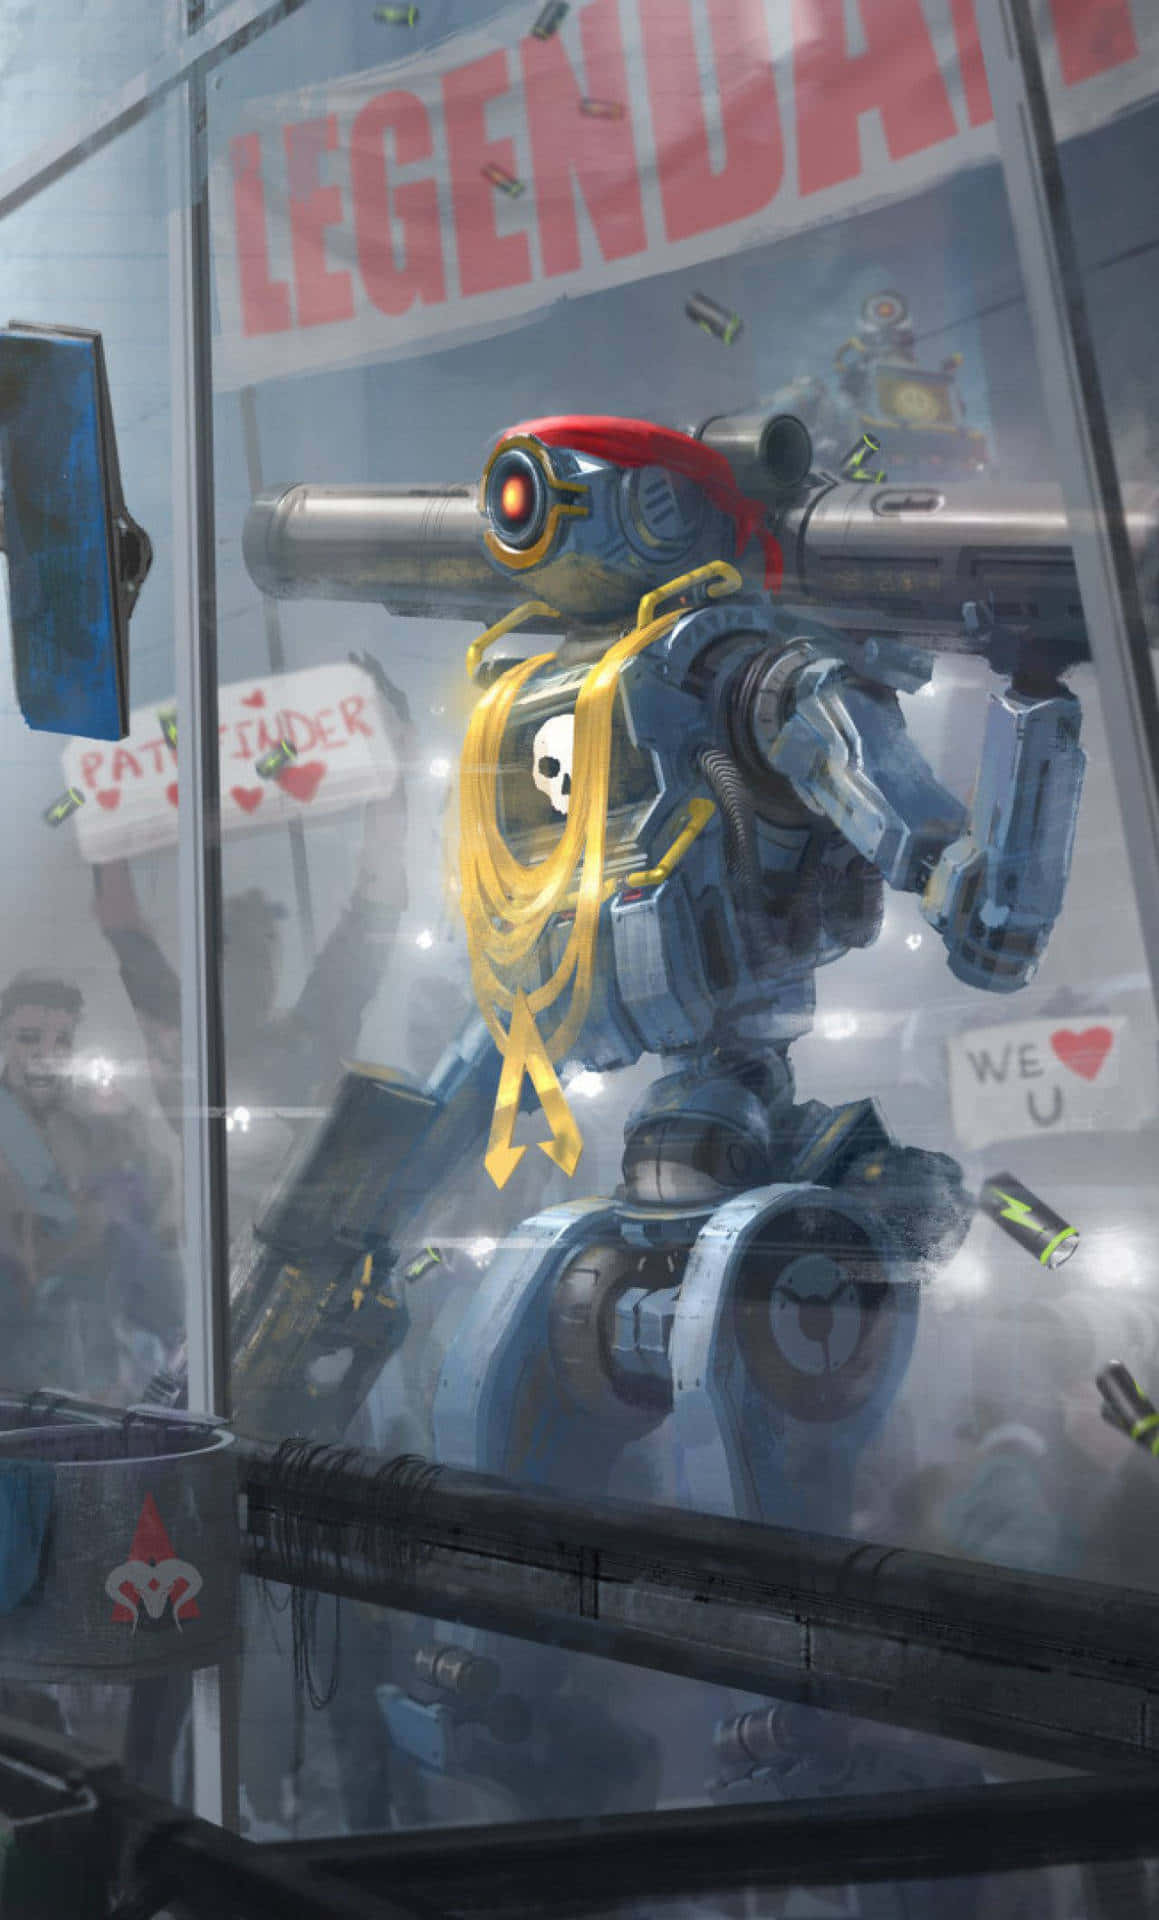 Pathfinder taking on the competition in Apex Legends Wallpaper